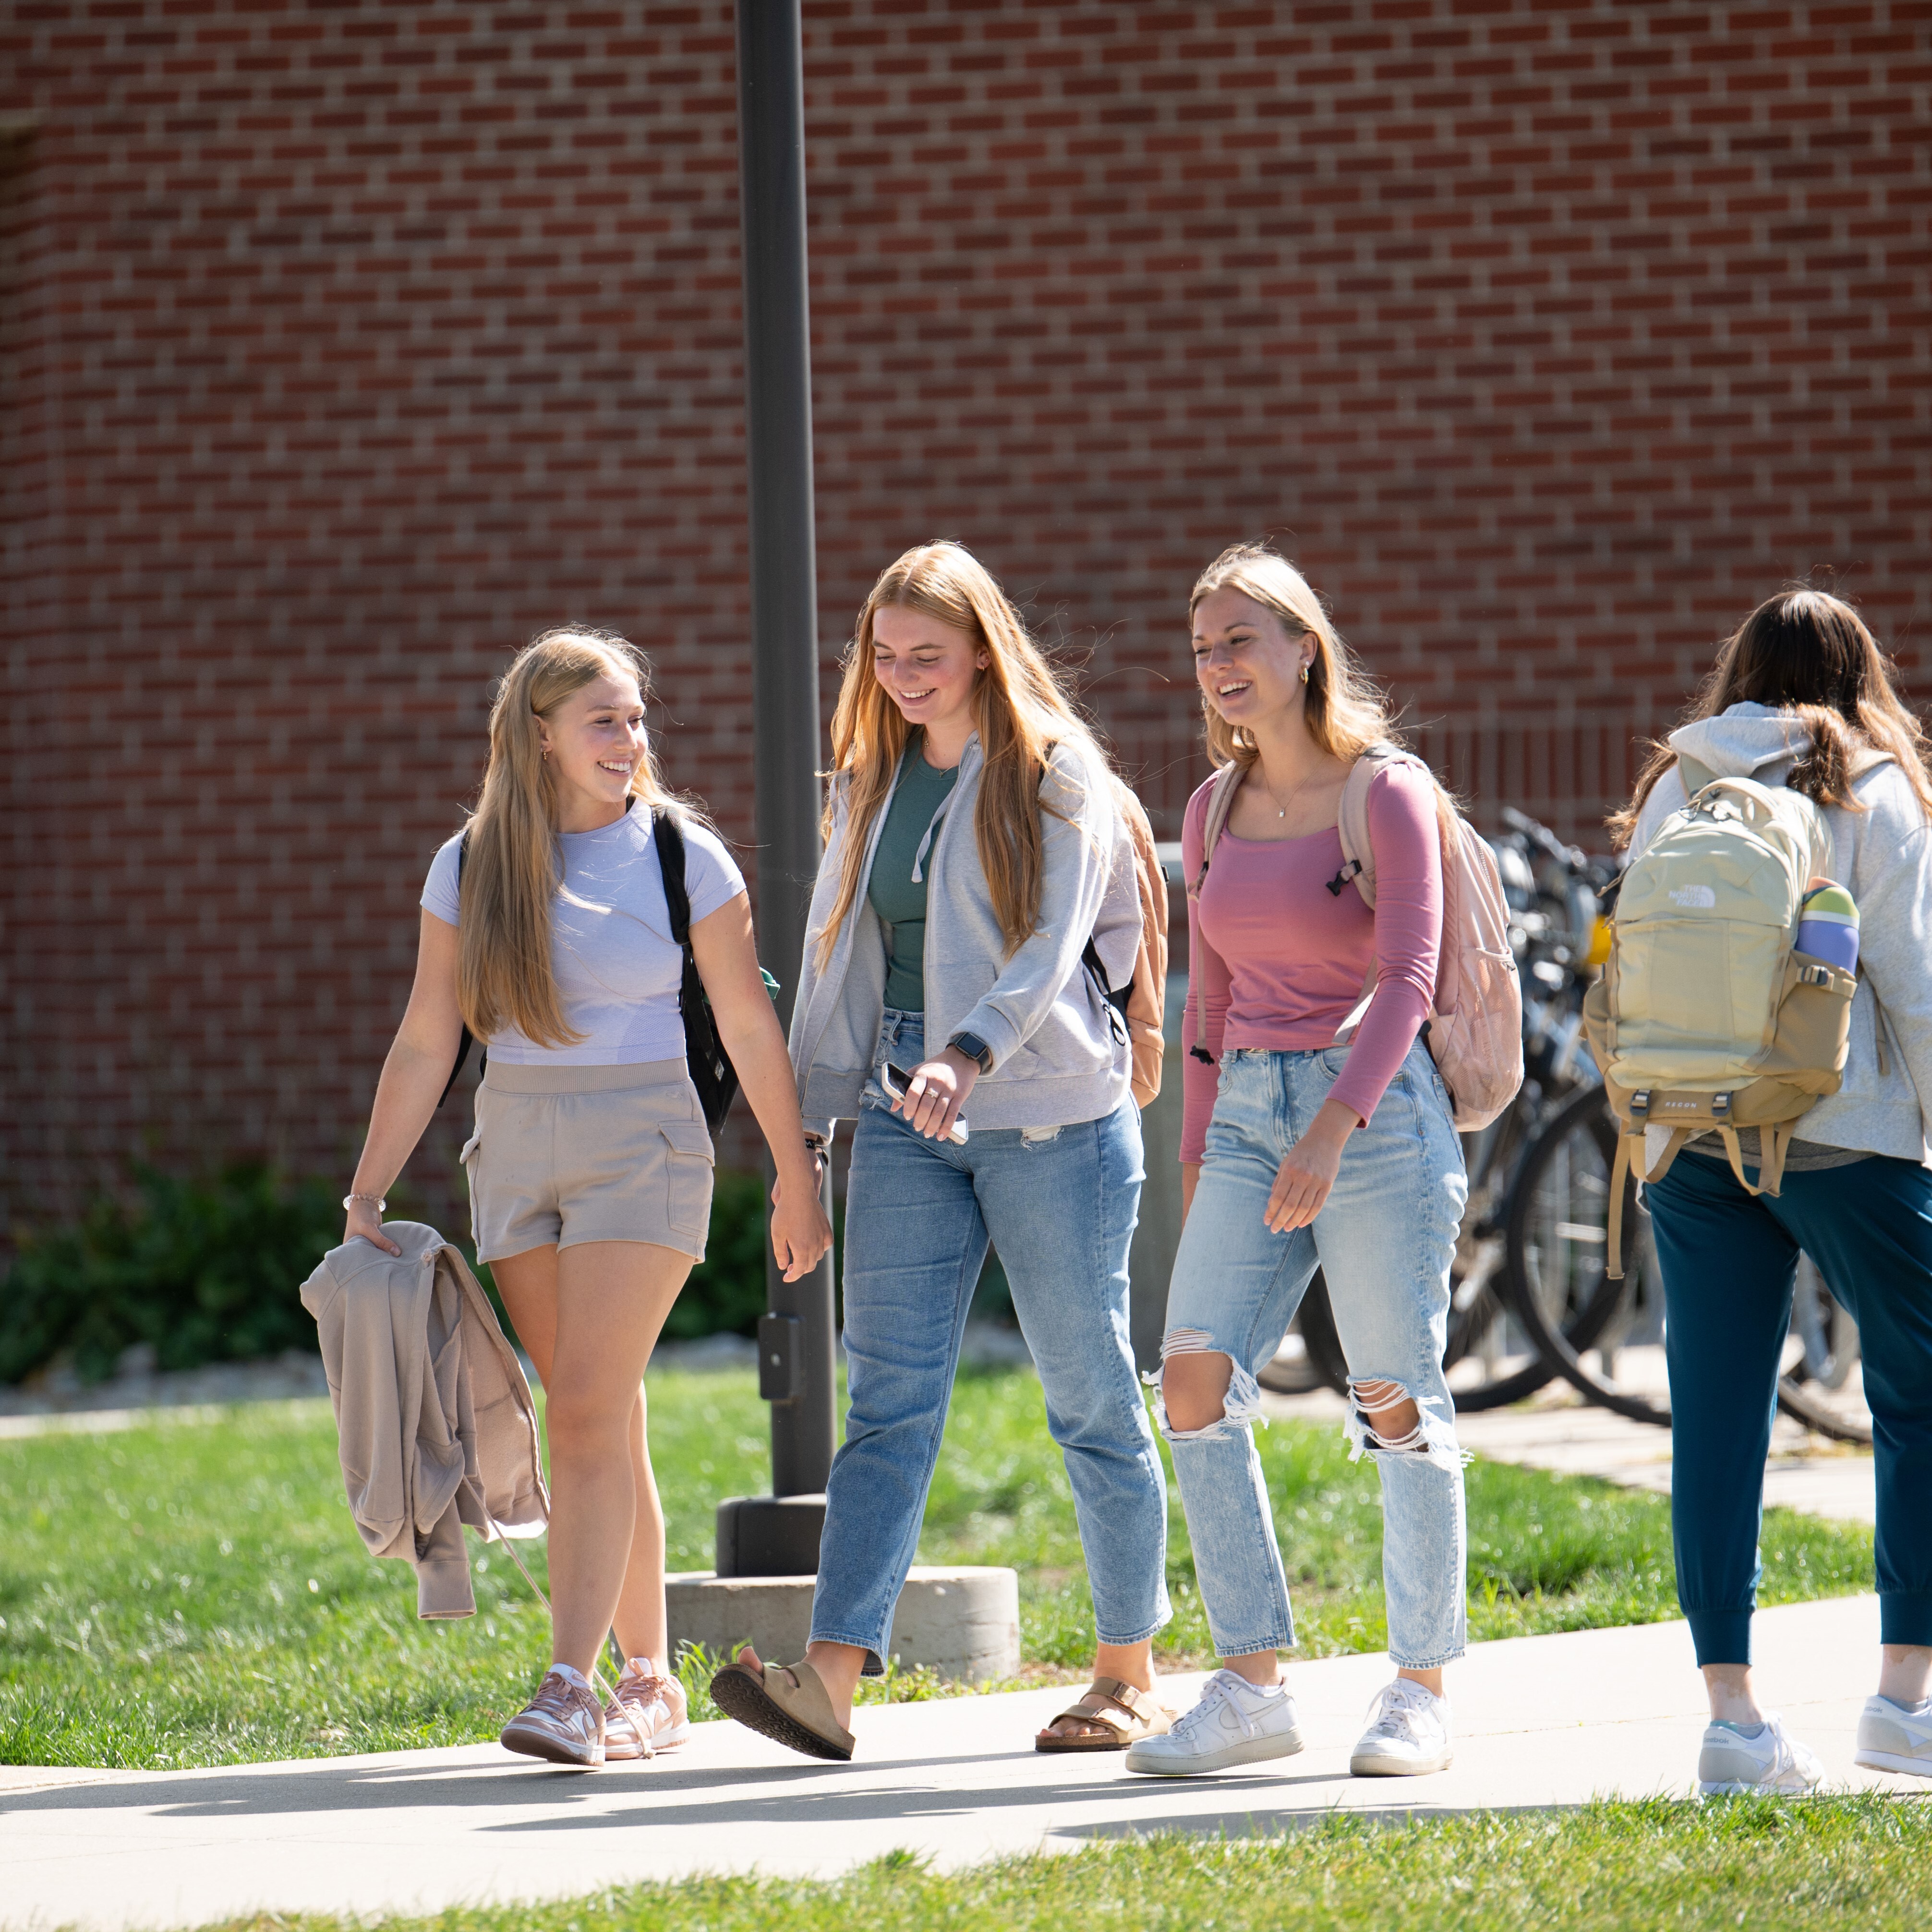 Female students walking a crossed campus